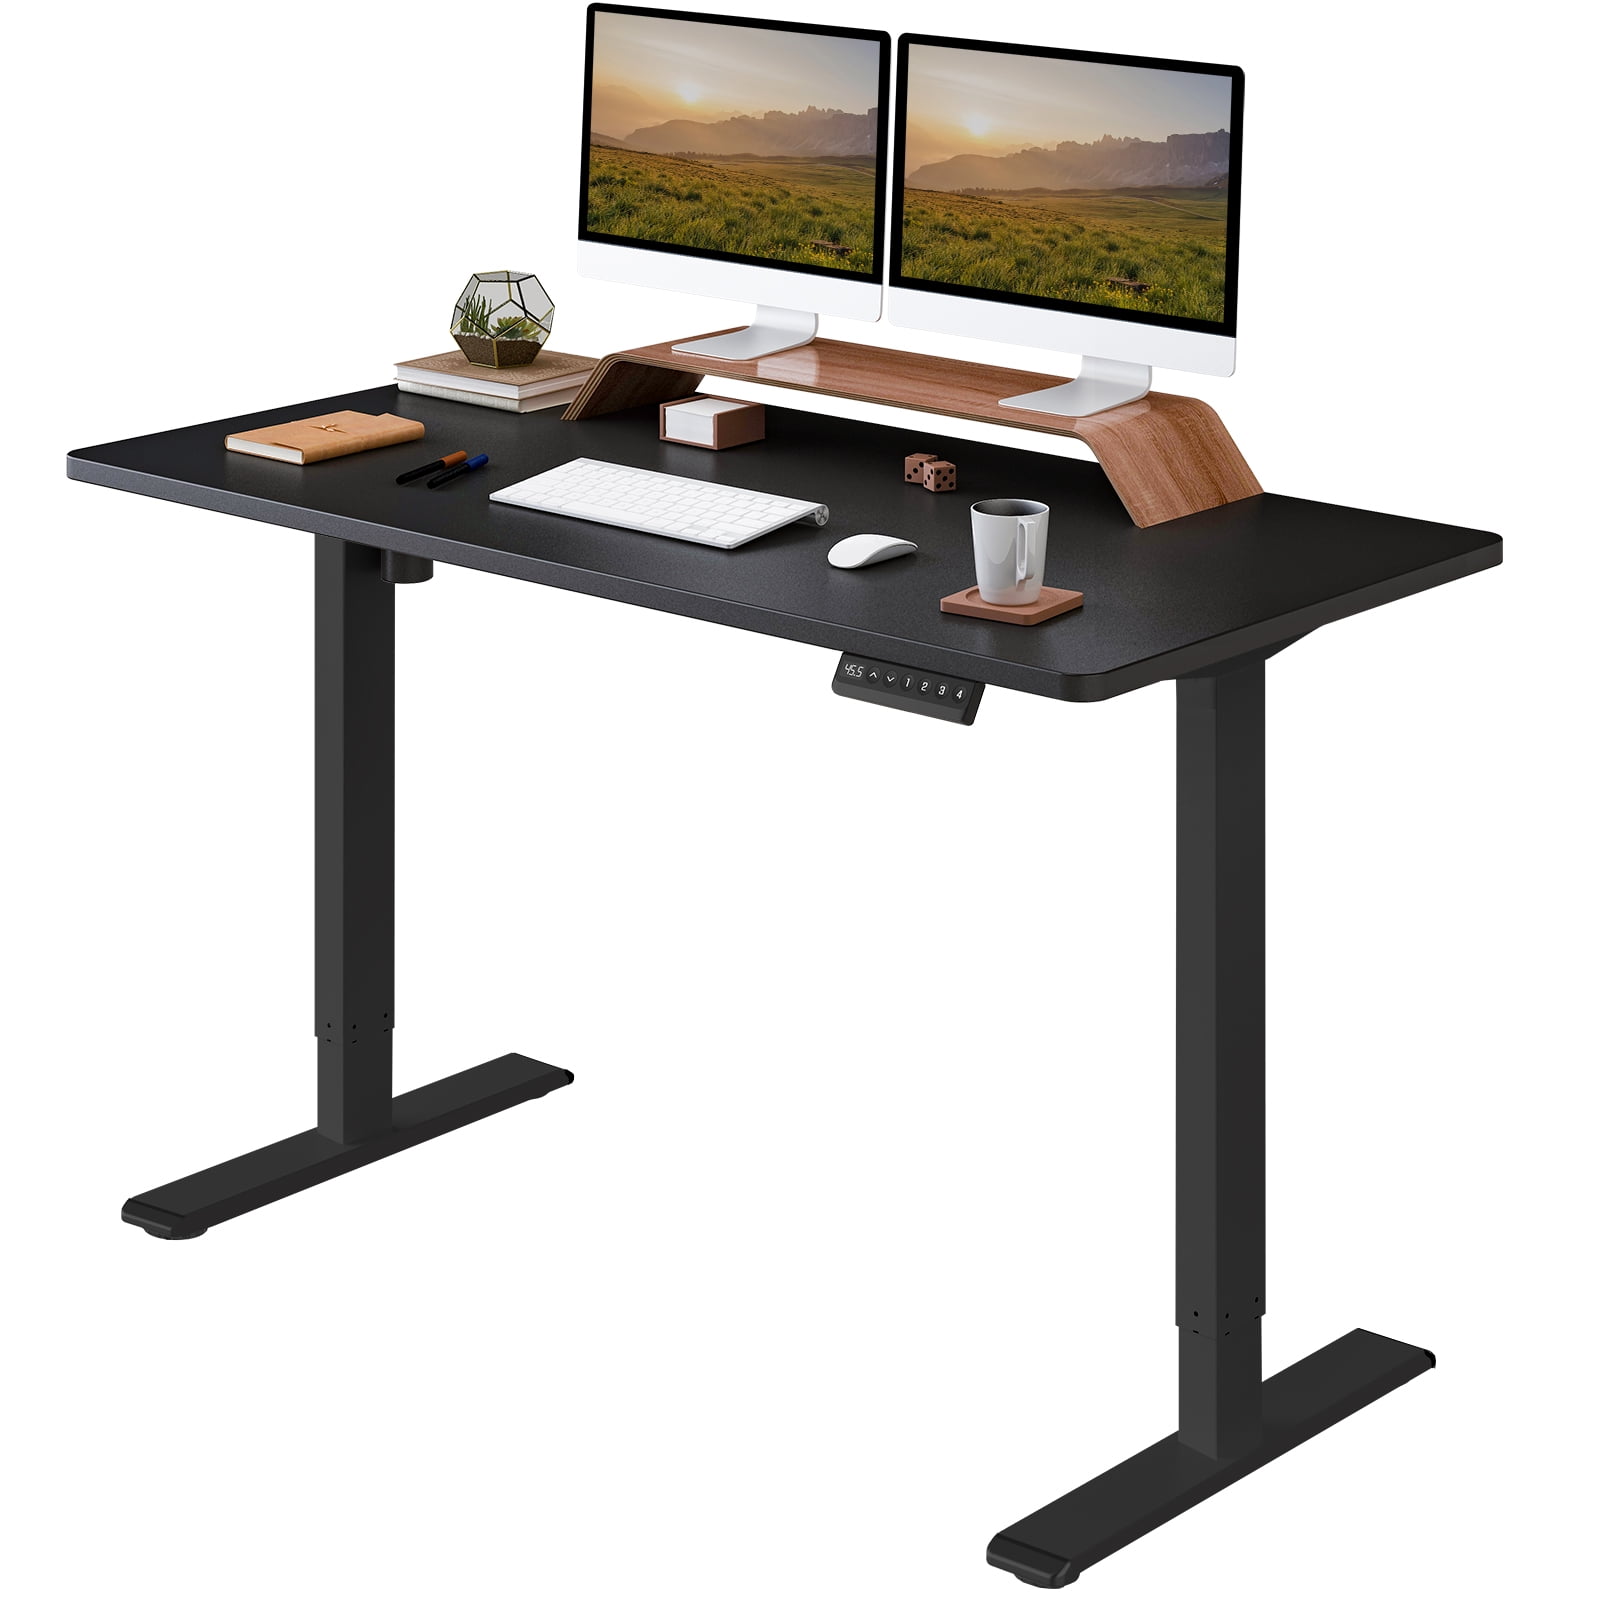 Gray+Mahogany Flexispot Height Adjustable Desk 60 x 24 inch Electric Standing Desk Stand Up Desk for Home Office 